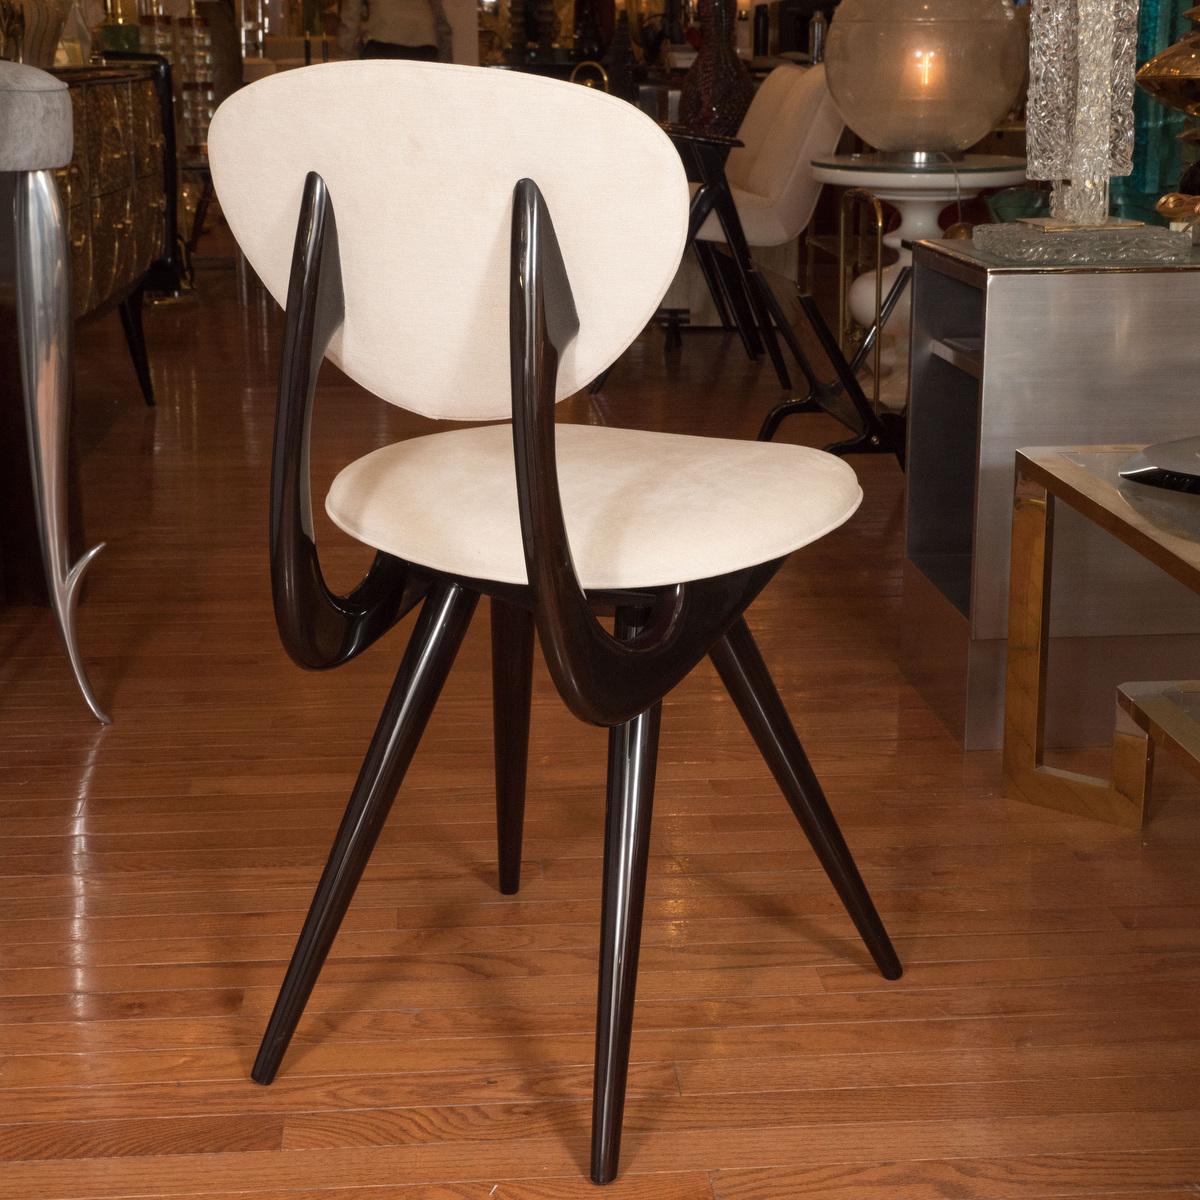 Italian Stylized Lacquered Wood Chairs